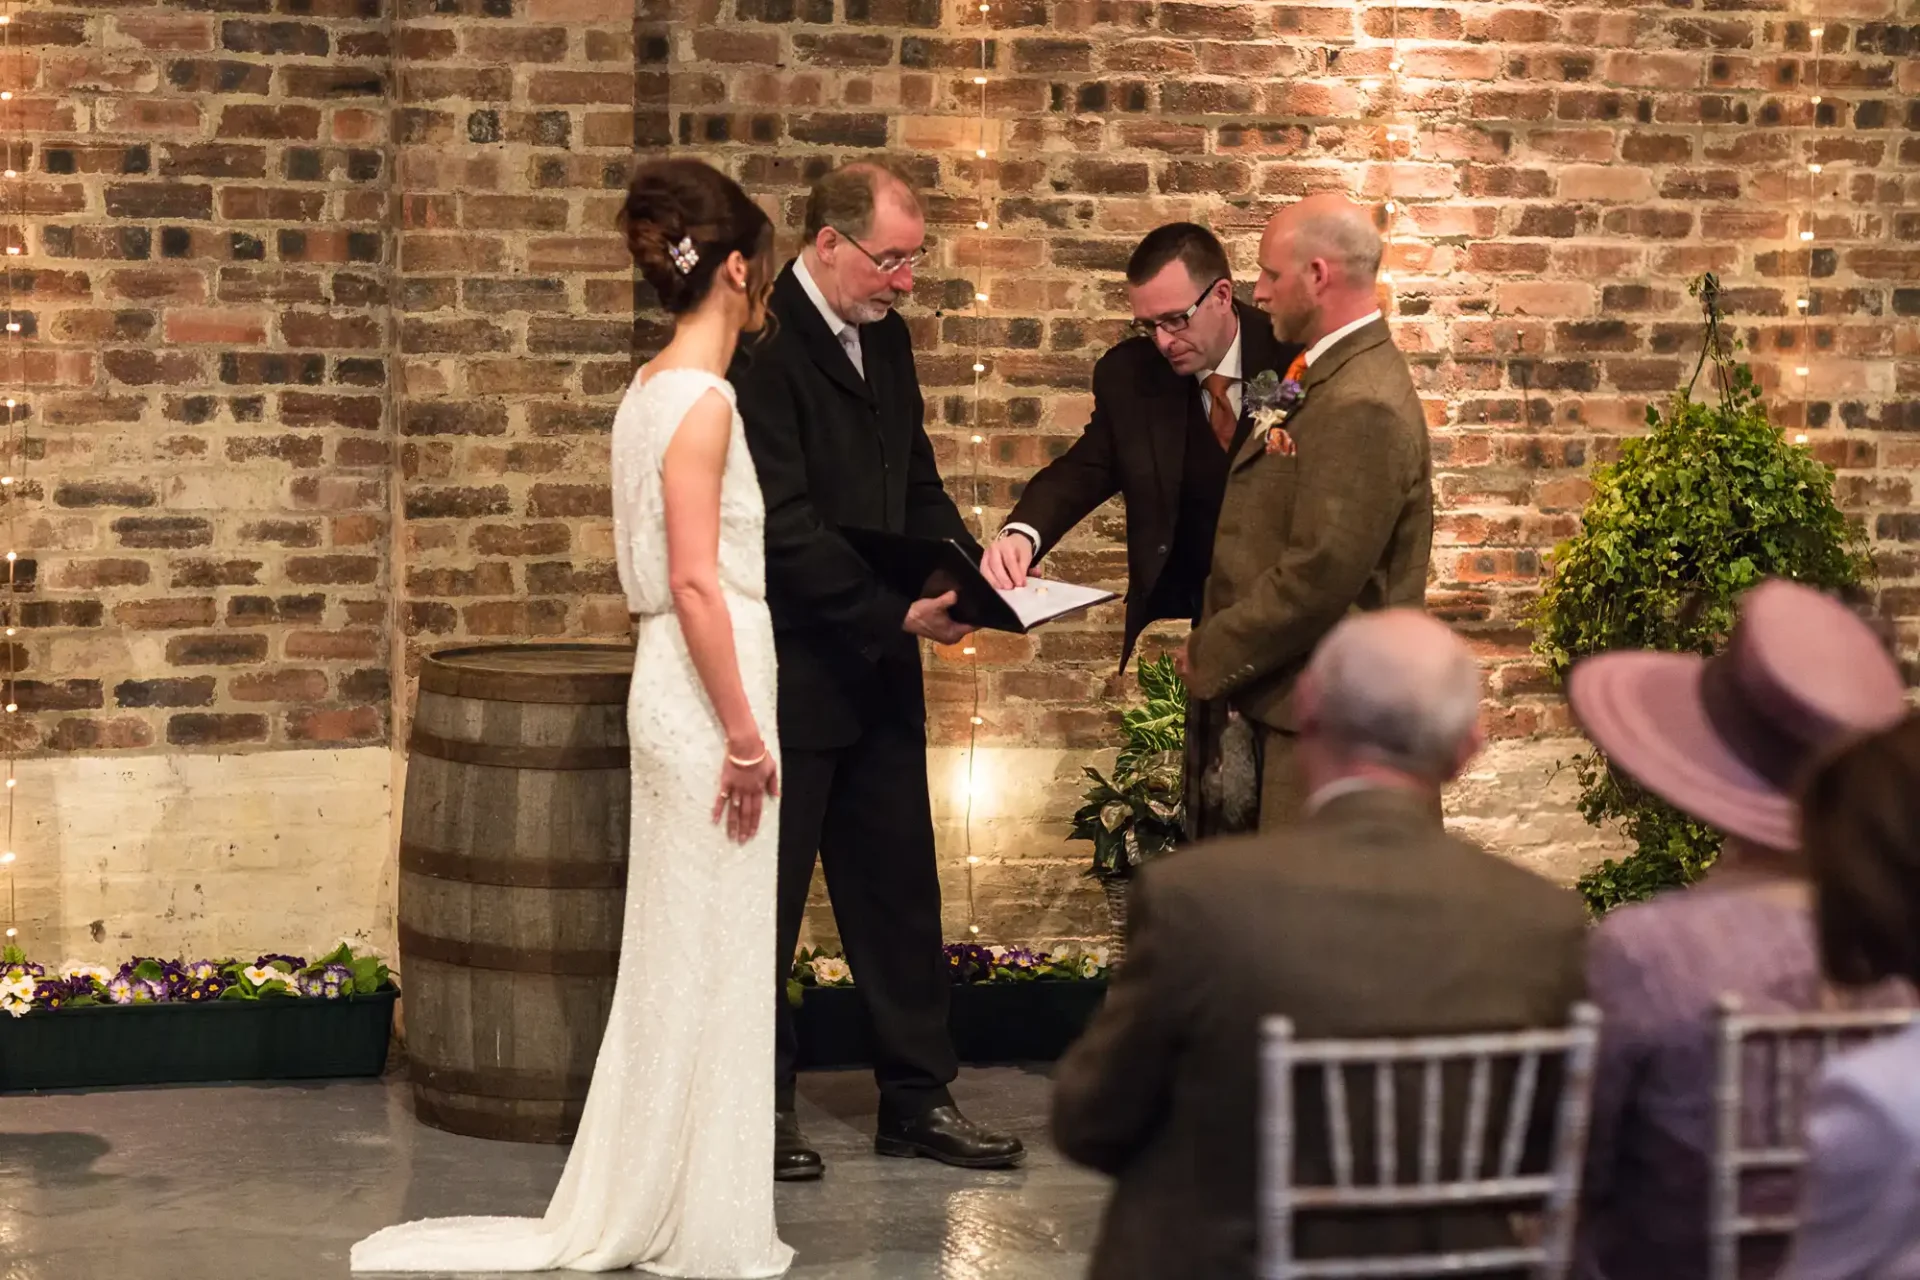 A wedding ceremony in progress inside a rustic venue with brick walls, featuring a bride and groom standing before an officiant, while two men look on. guests are seated observing.